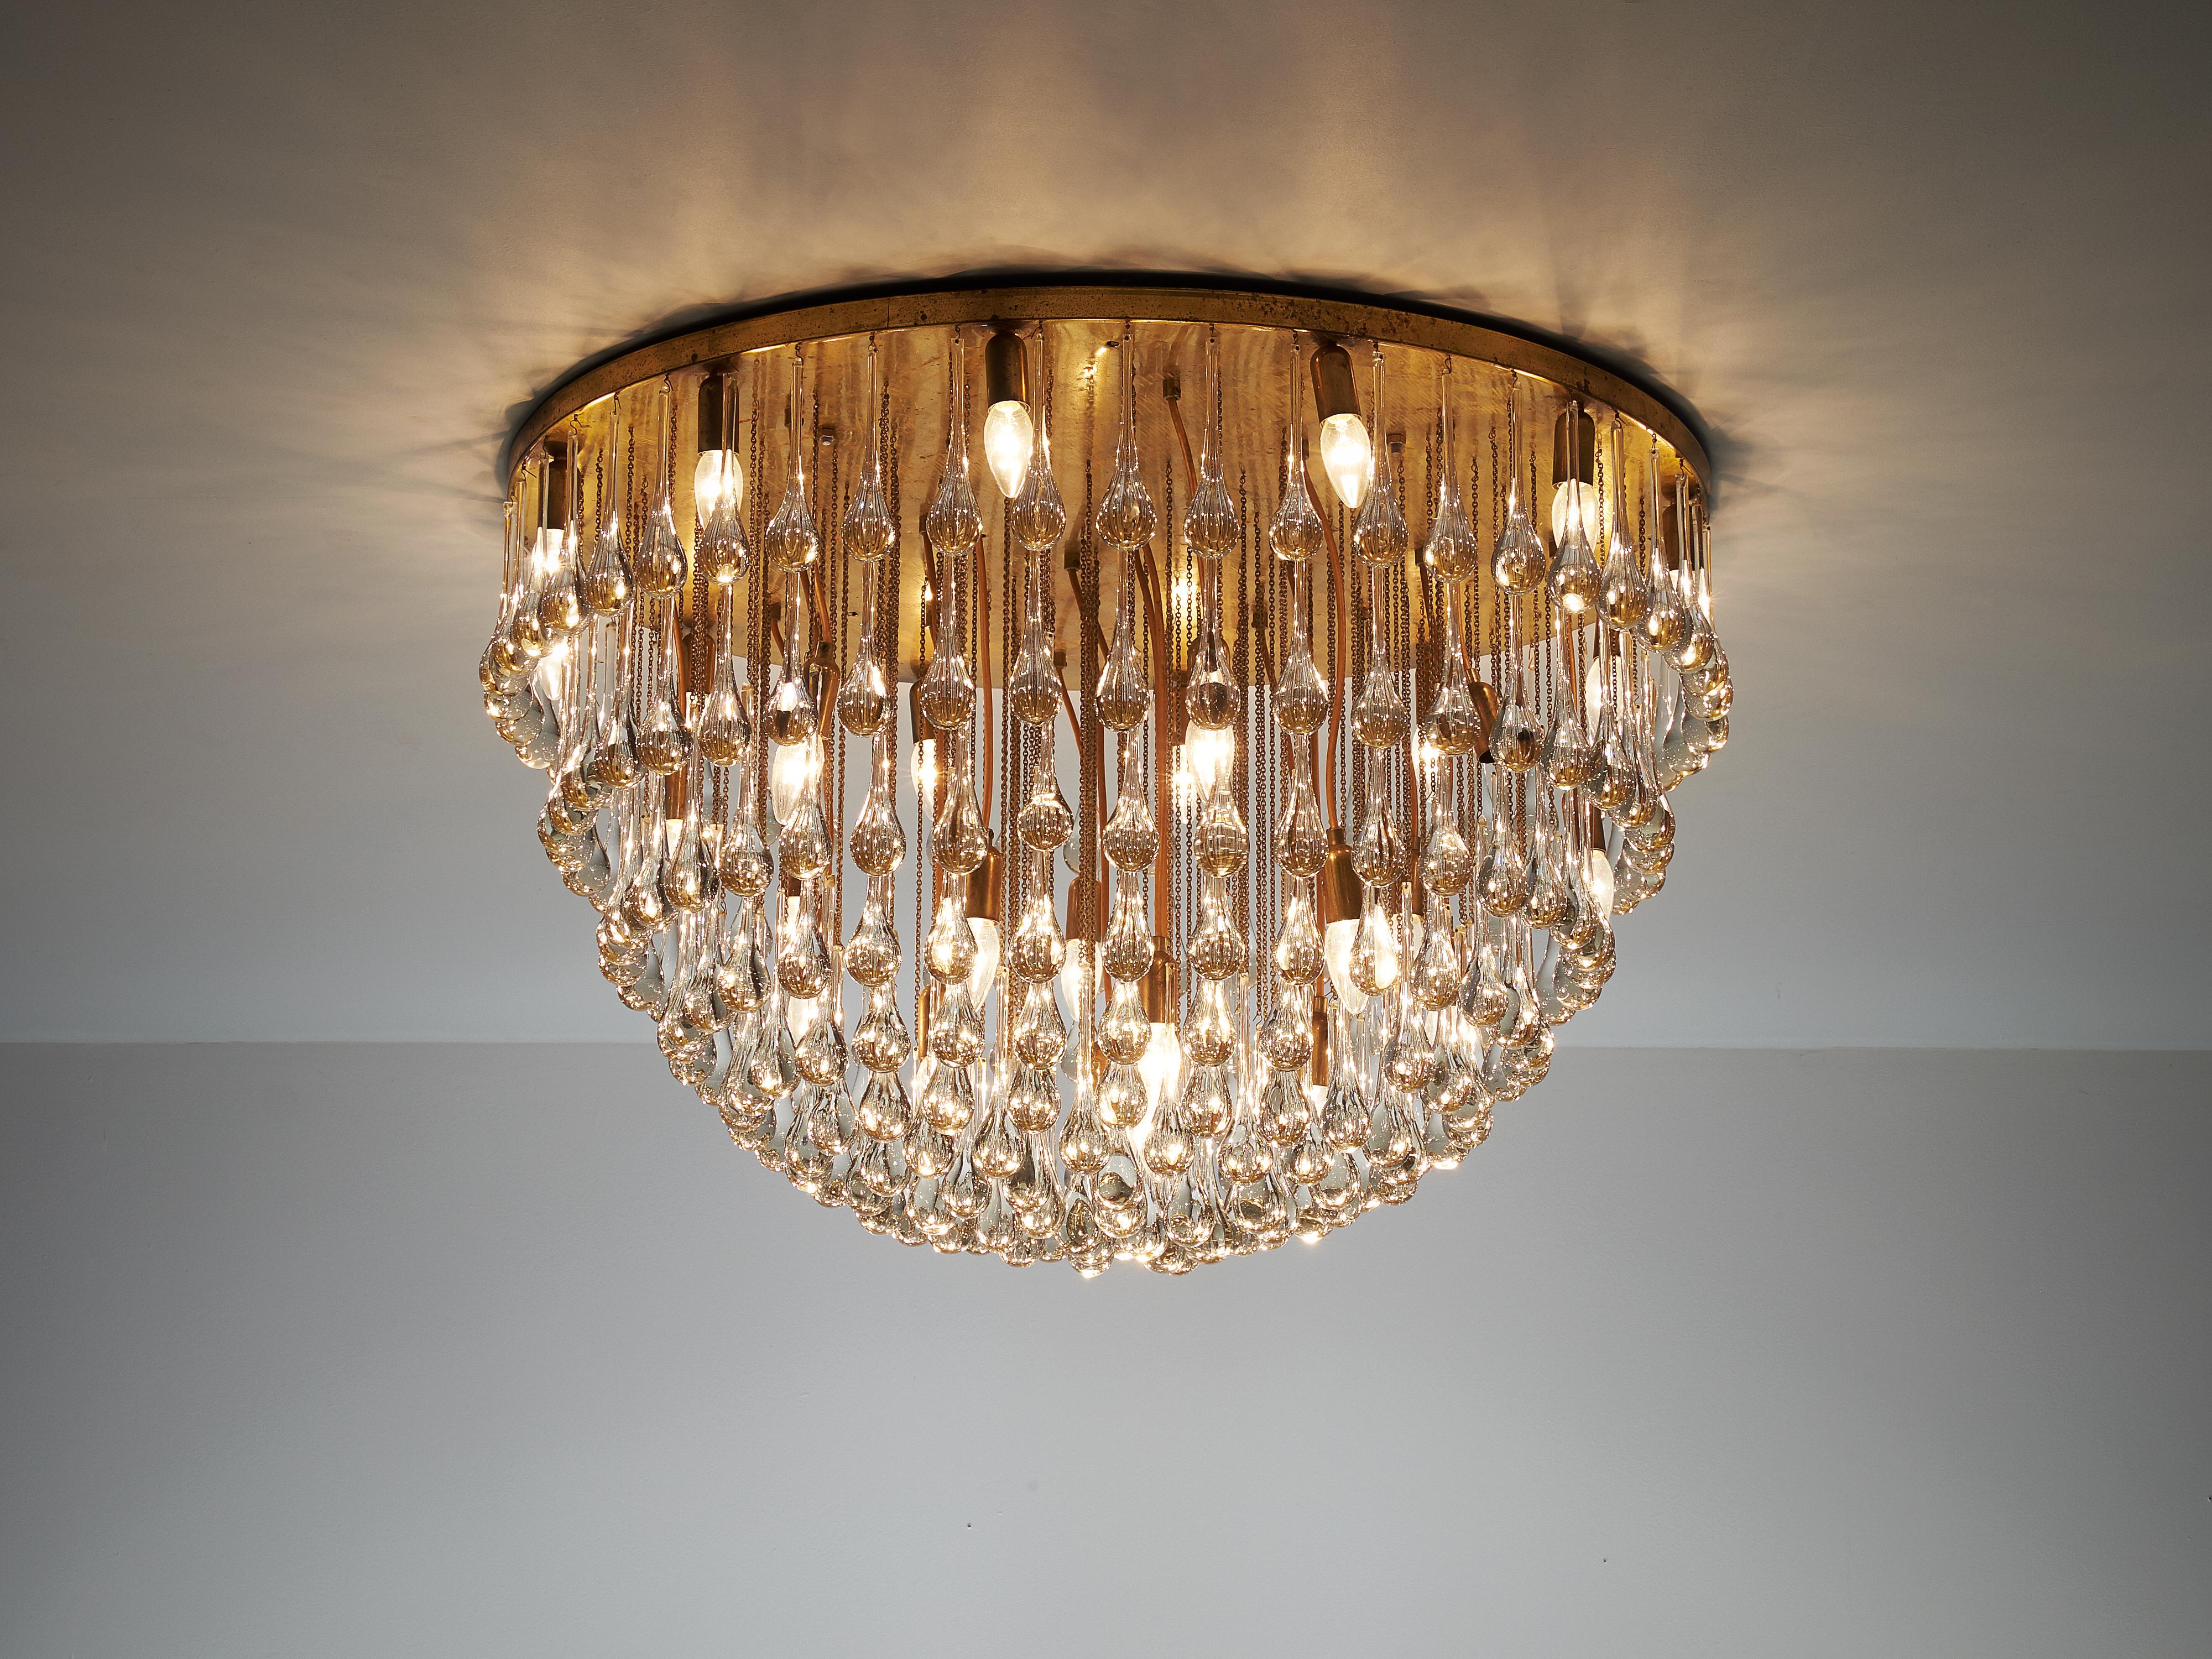 Chandelier, brass, glass, Italy, 1960s

Majestic Italian chandelier with a large amount of glass drops. This noble lamp creates a stunning light partition. The glass drops positioned on different heights combine together into a large globe. In